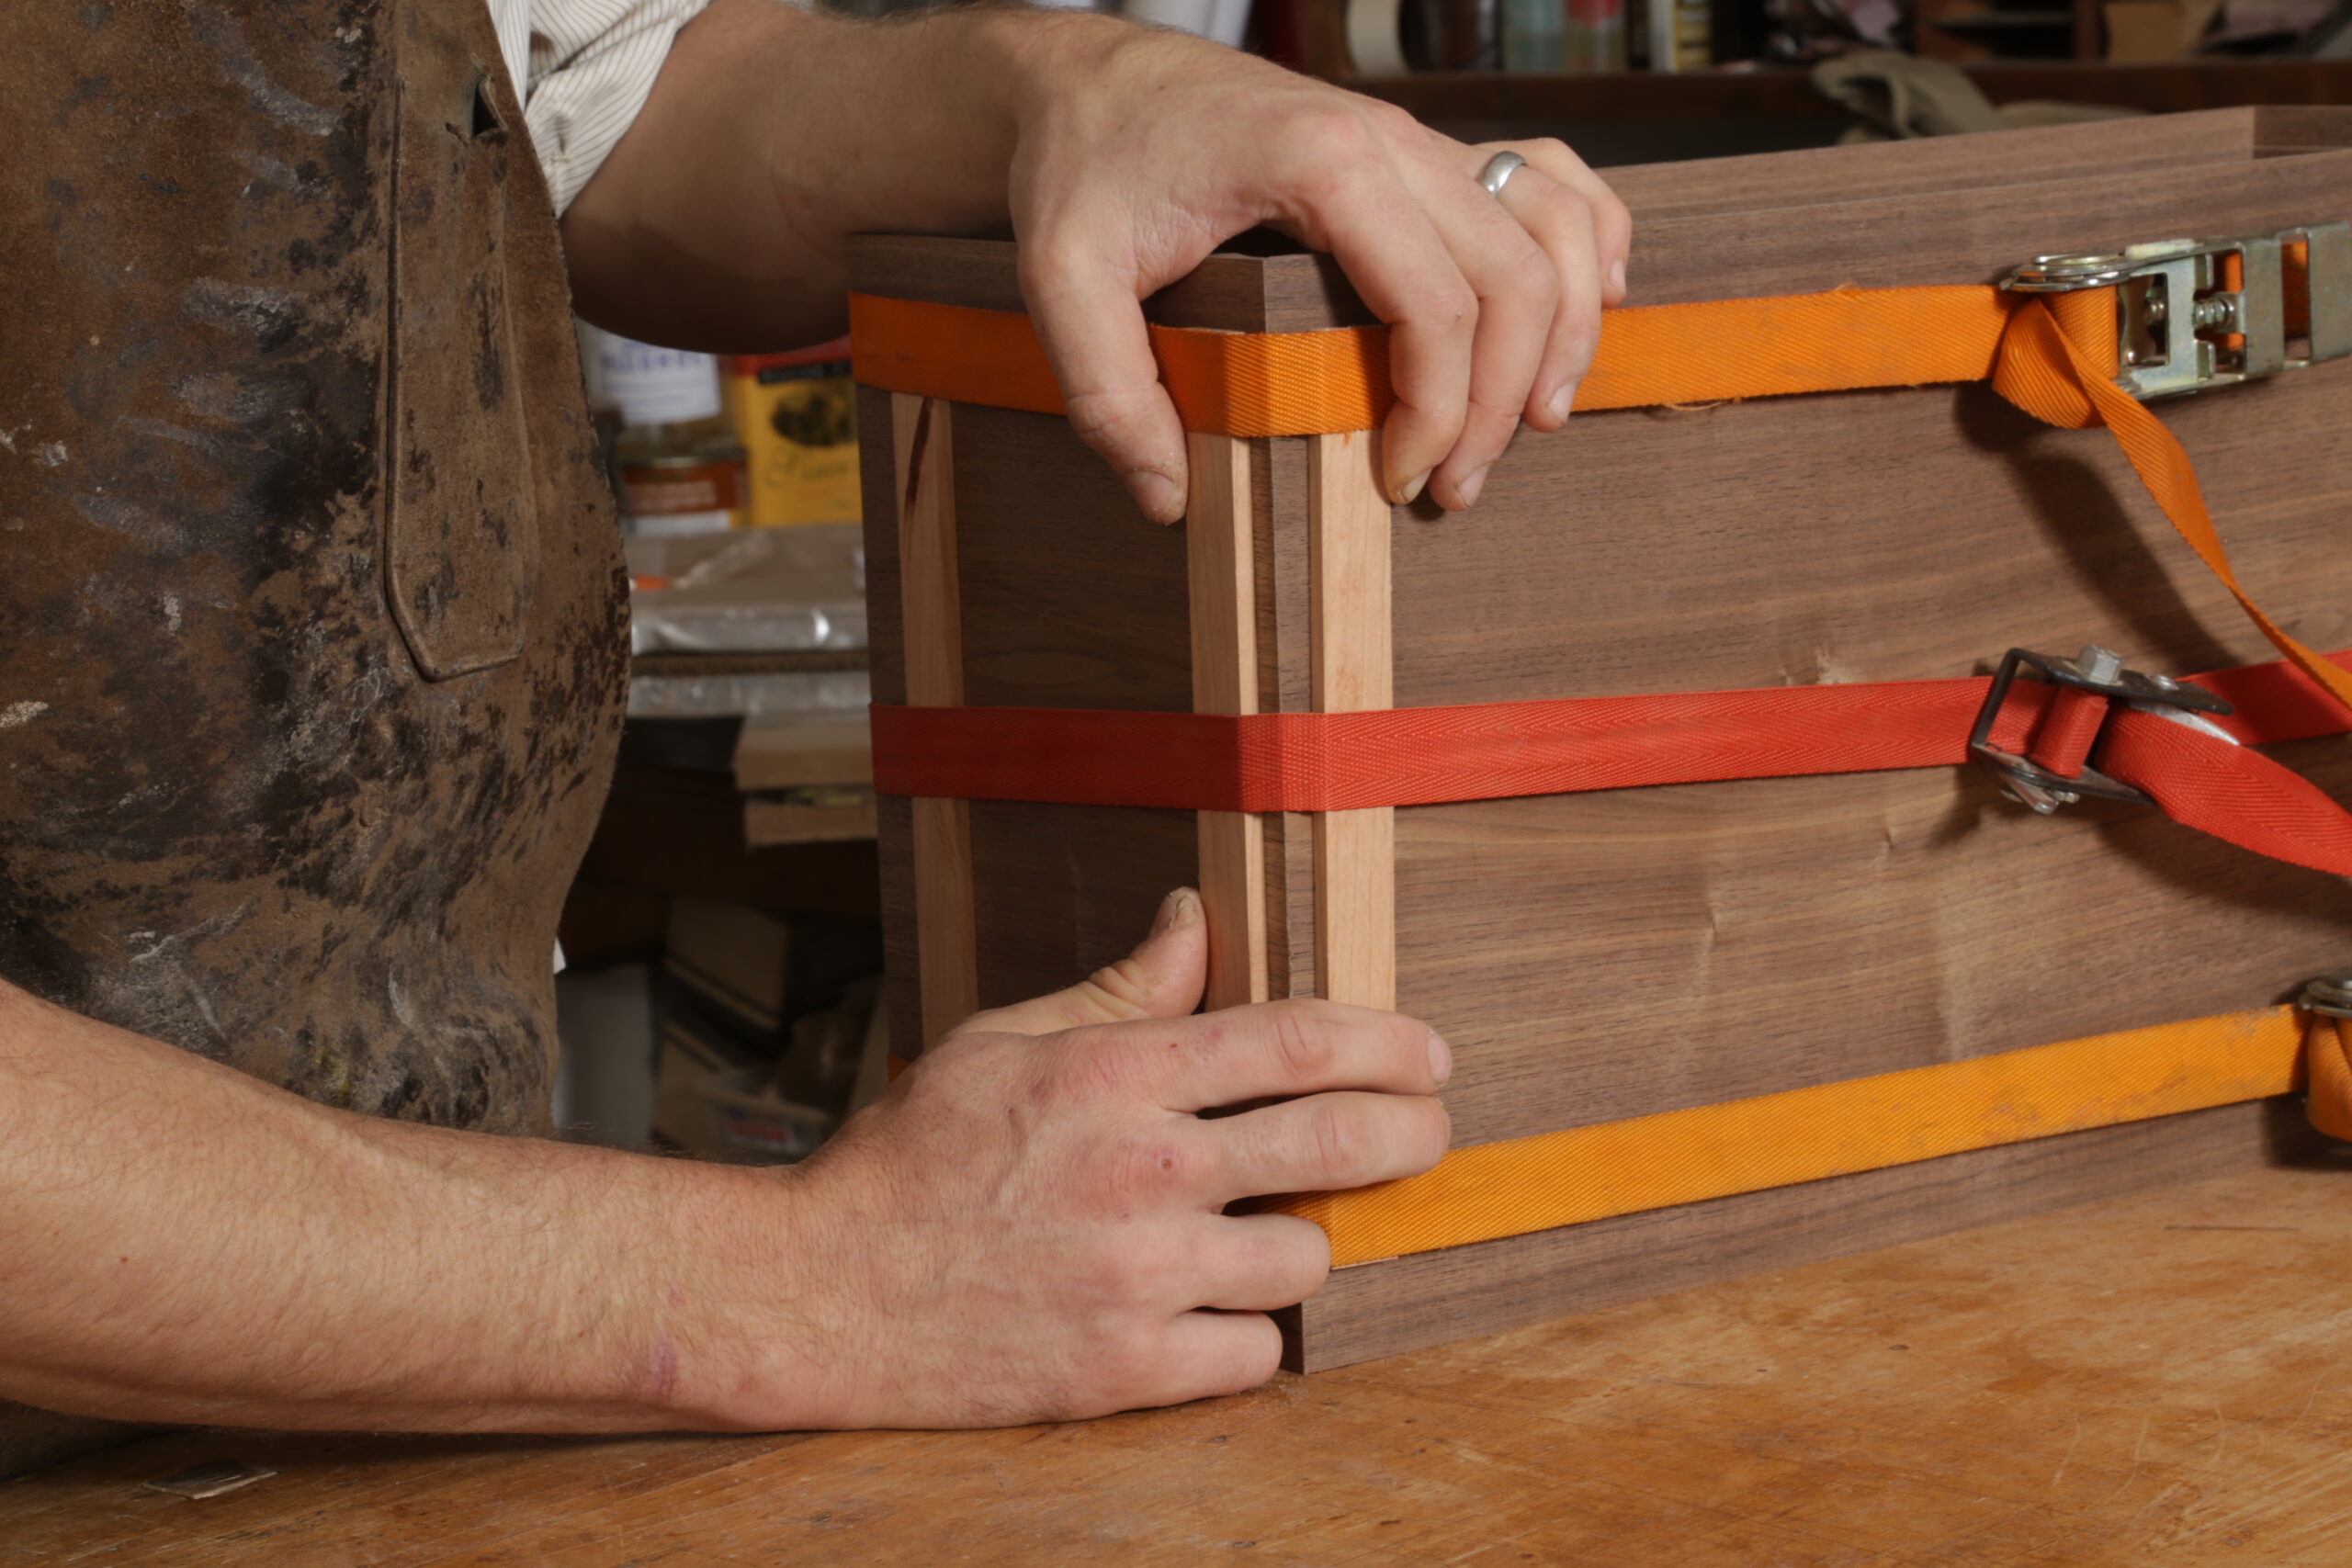 After tightening the ratchet straps, the author is pinching two strips of wood toward a corner of the box.